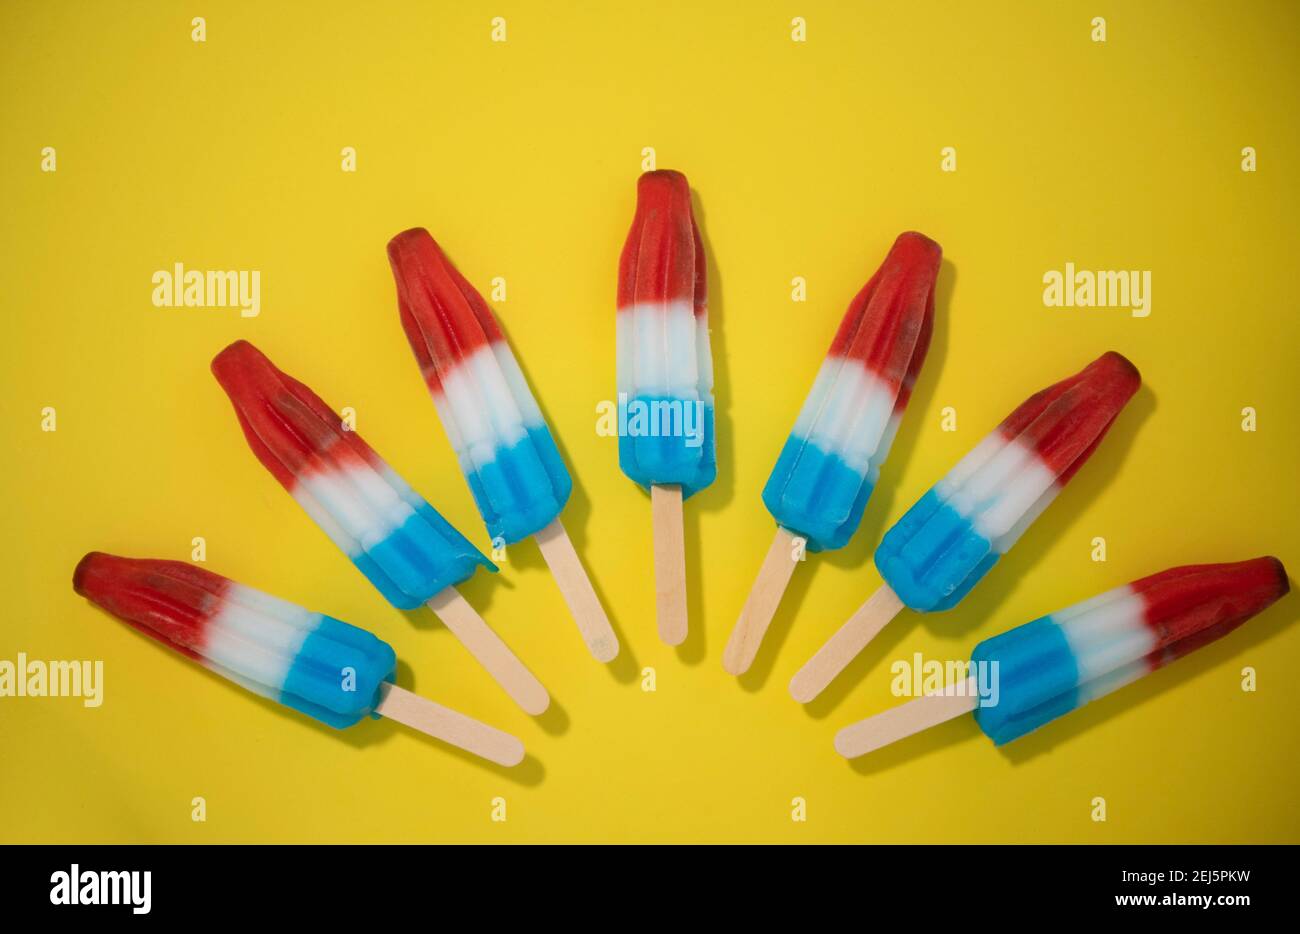 Red, White and Blue Novelty ice cream bombpop shot on yellow background, stop action animation exploding like fireworks. Series 4 of 8. Stock Photo